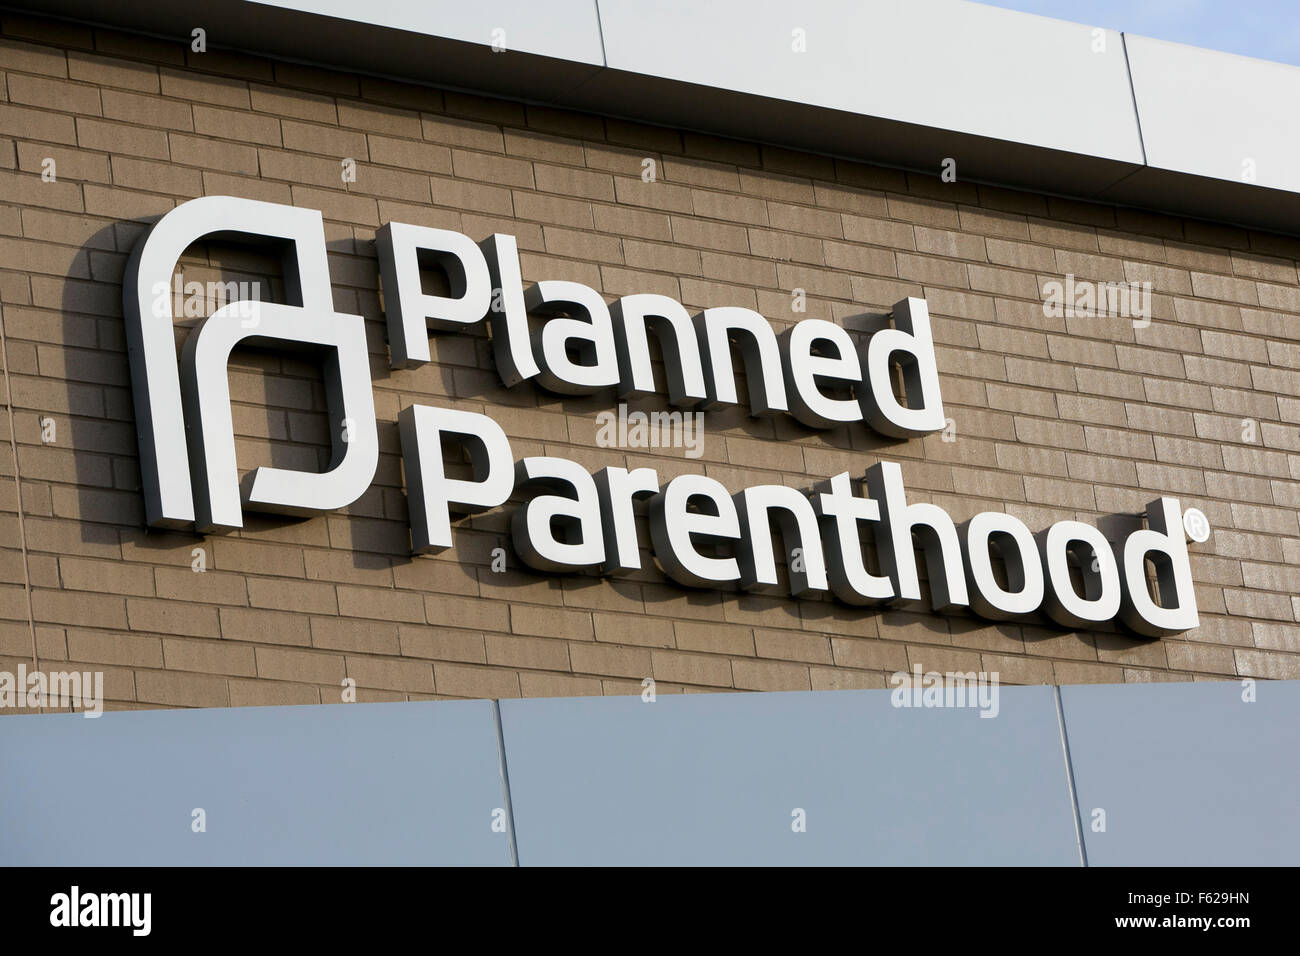 A logo sign outside of a Planned Parenthood medical clinic in St. Paul, Minnesota on October 25, 2015. Stock Photo